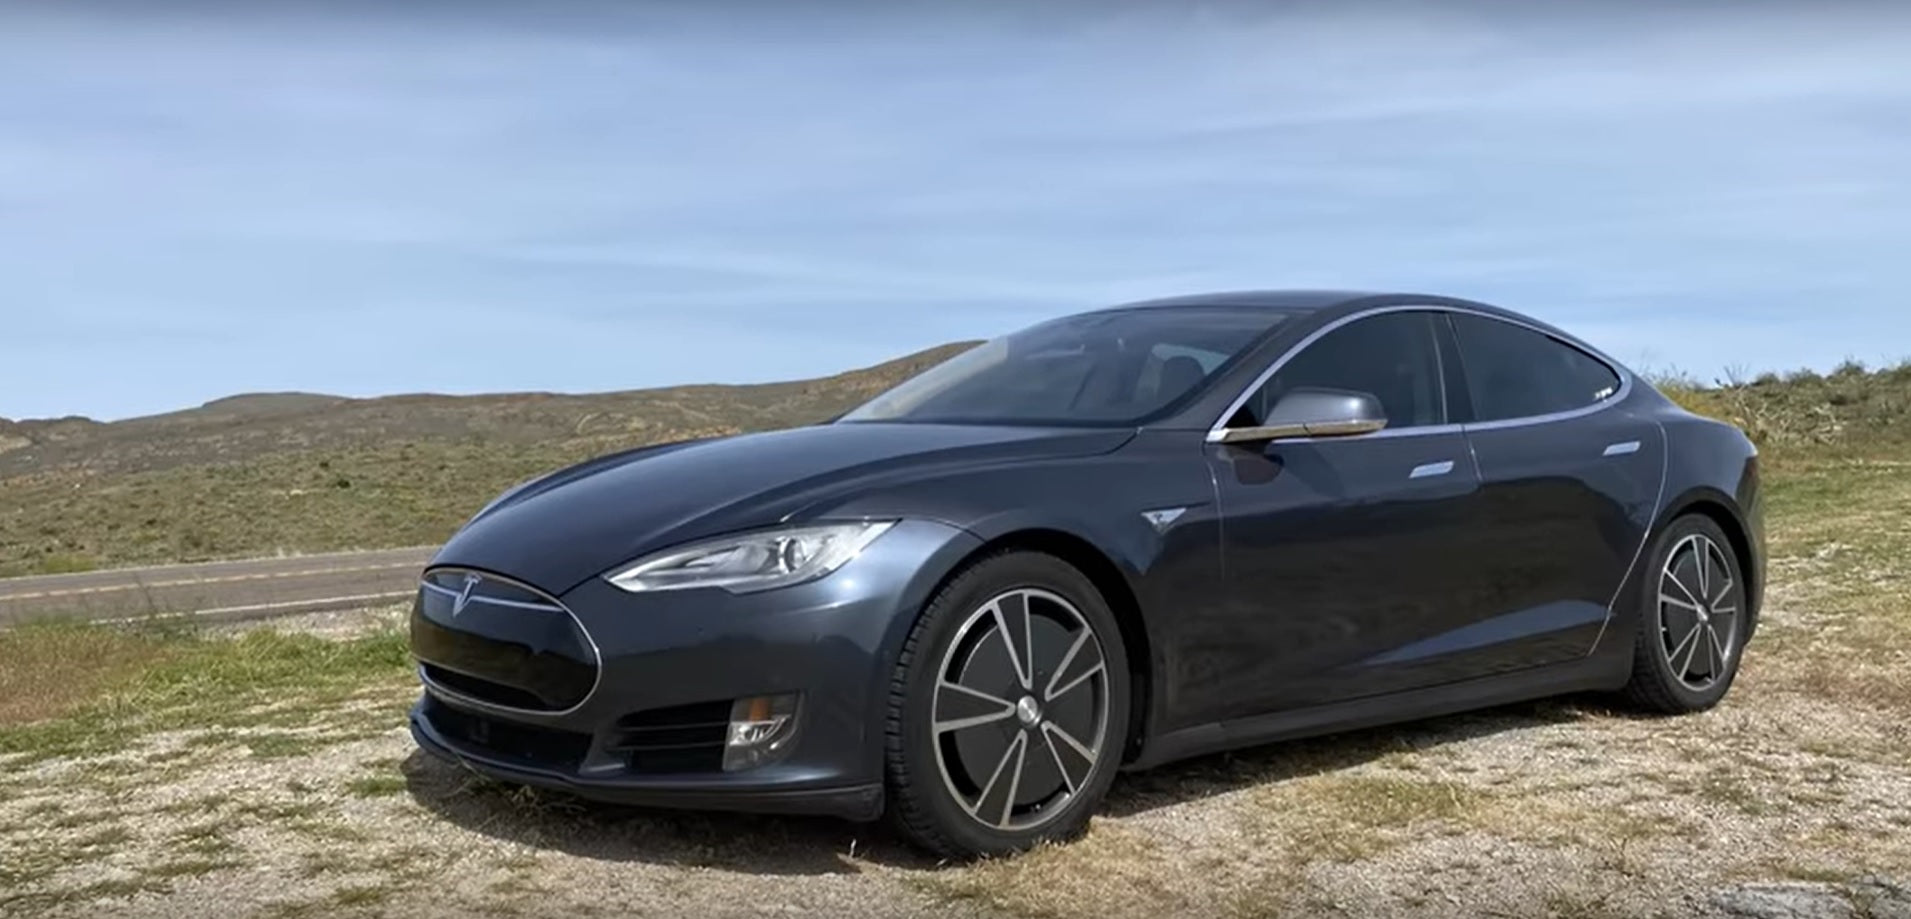 How's Tesla Battery Perform After 146K Miles and 1K Times Charging?